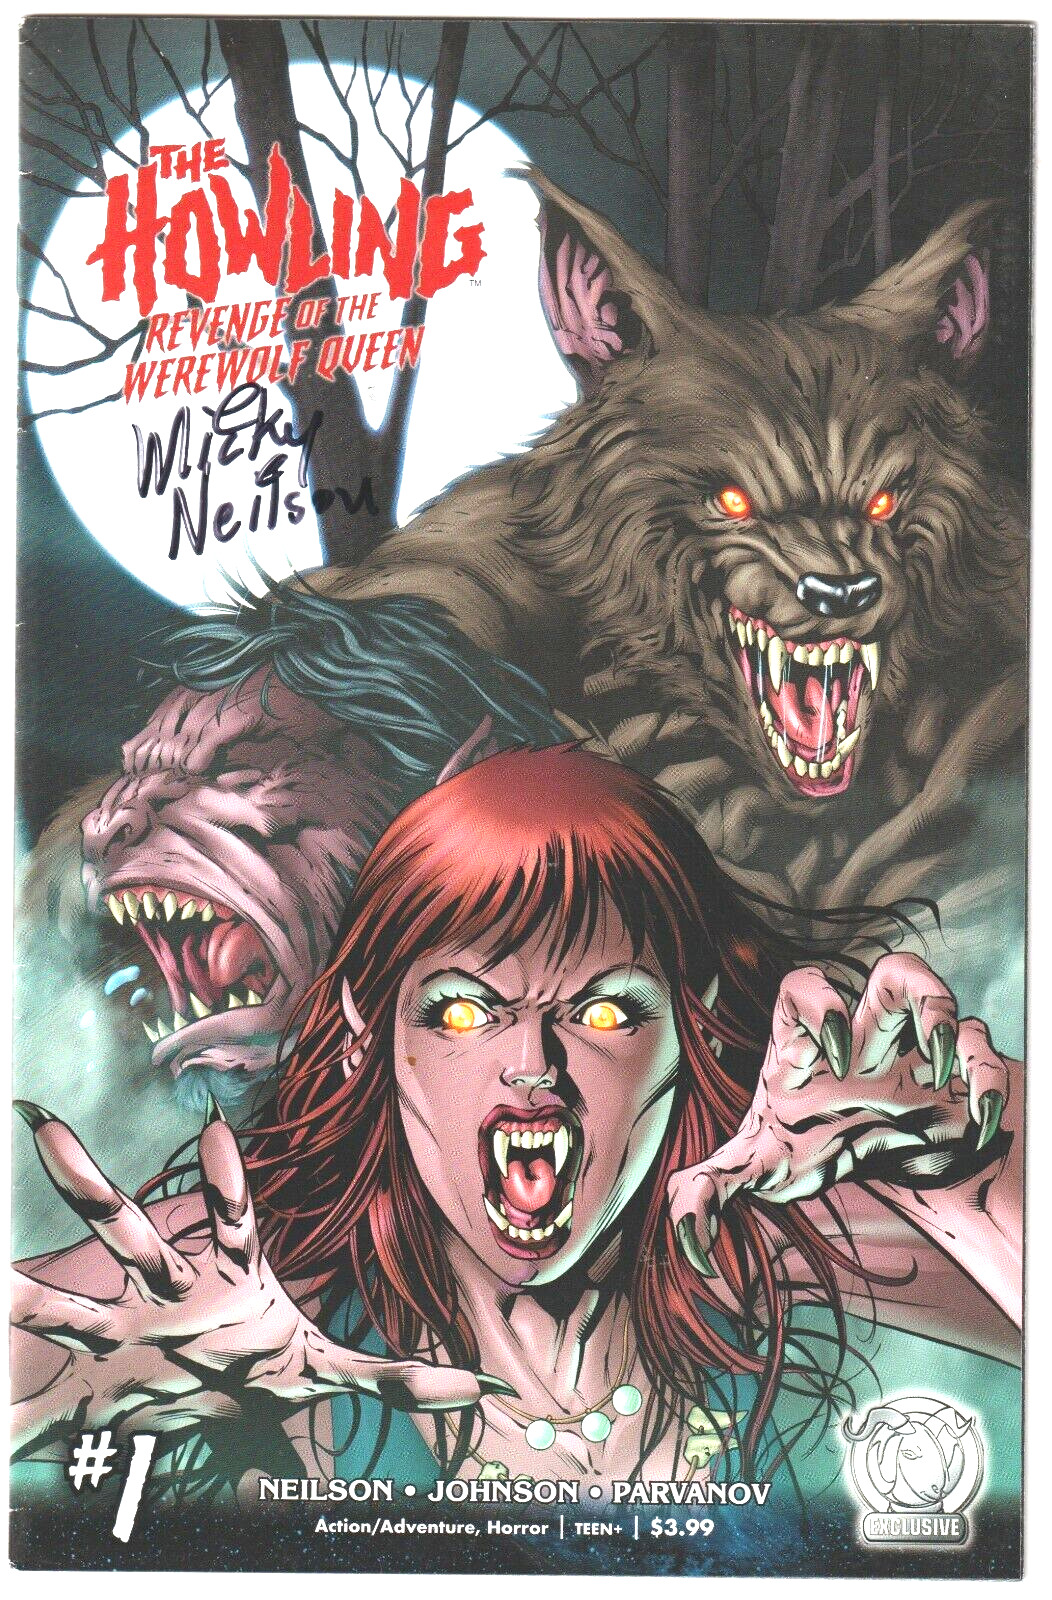 the Howling Revenge of the Werewolf Queen #1E  singed by micky neilson